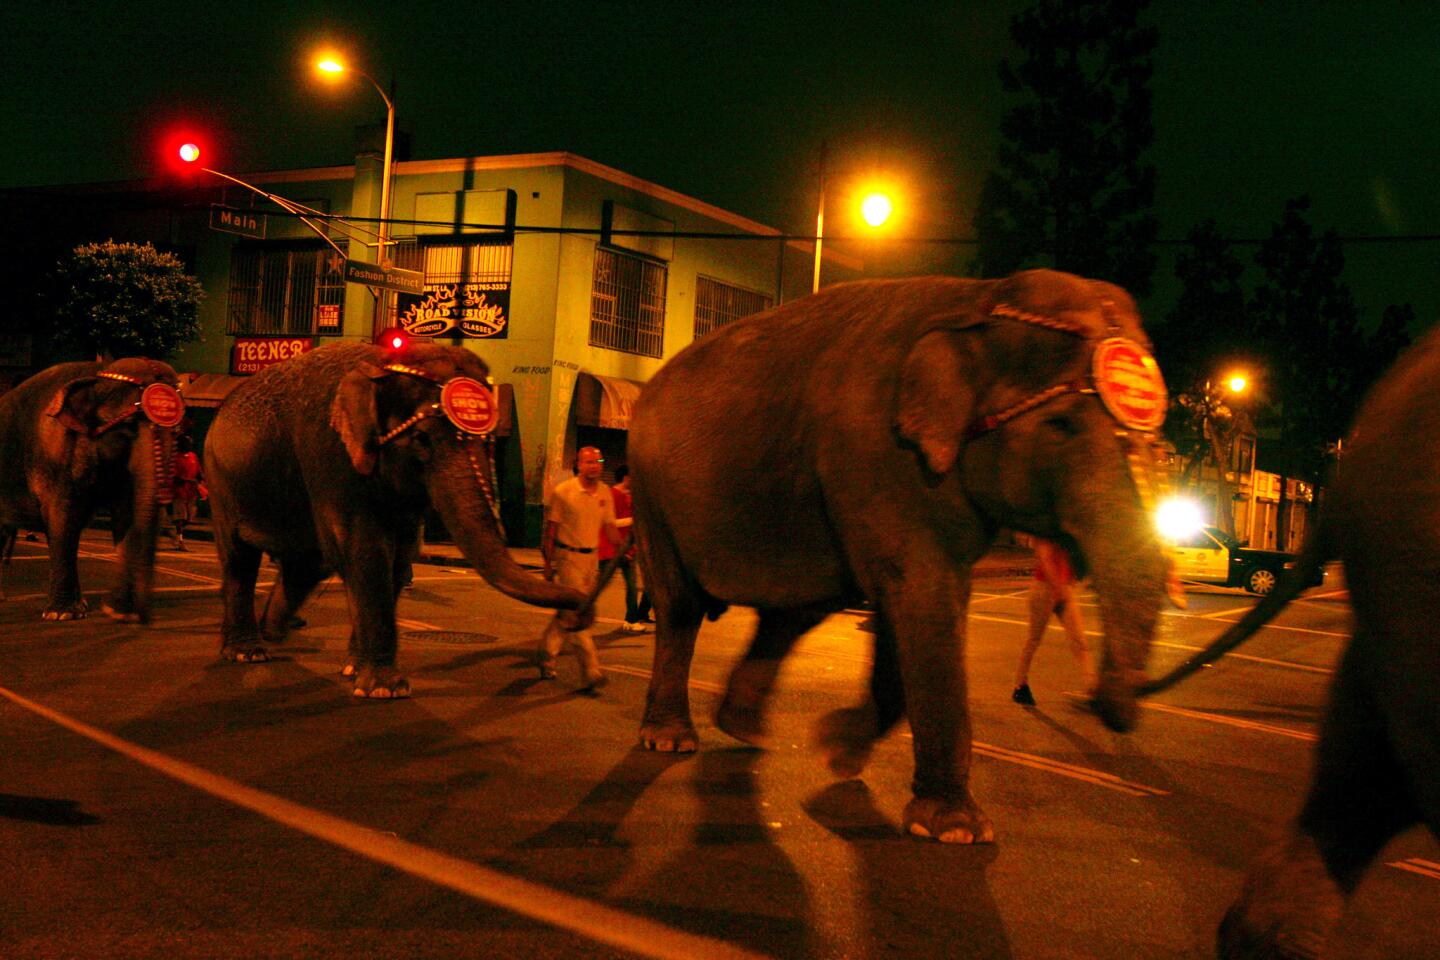 Ringling Bros. and Barnum & Baily Circus unloads about a dozen elephants from a train to walk them to Staples Center in 2009.